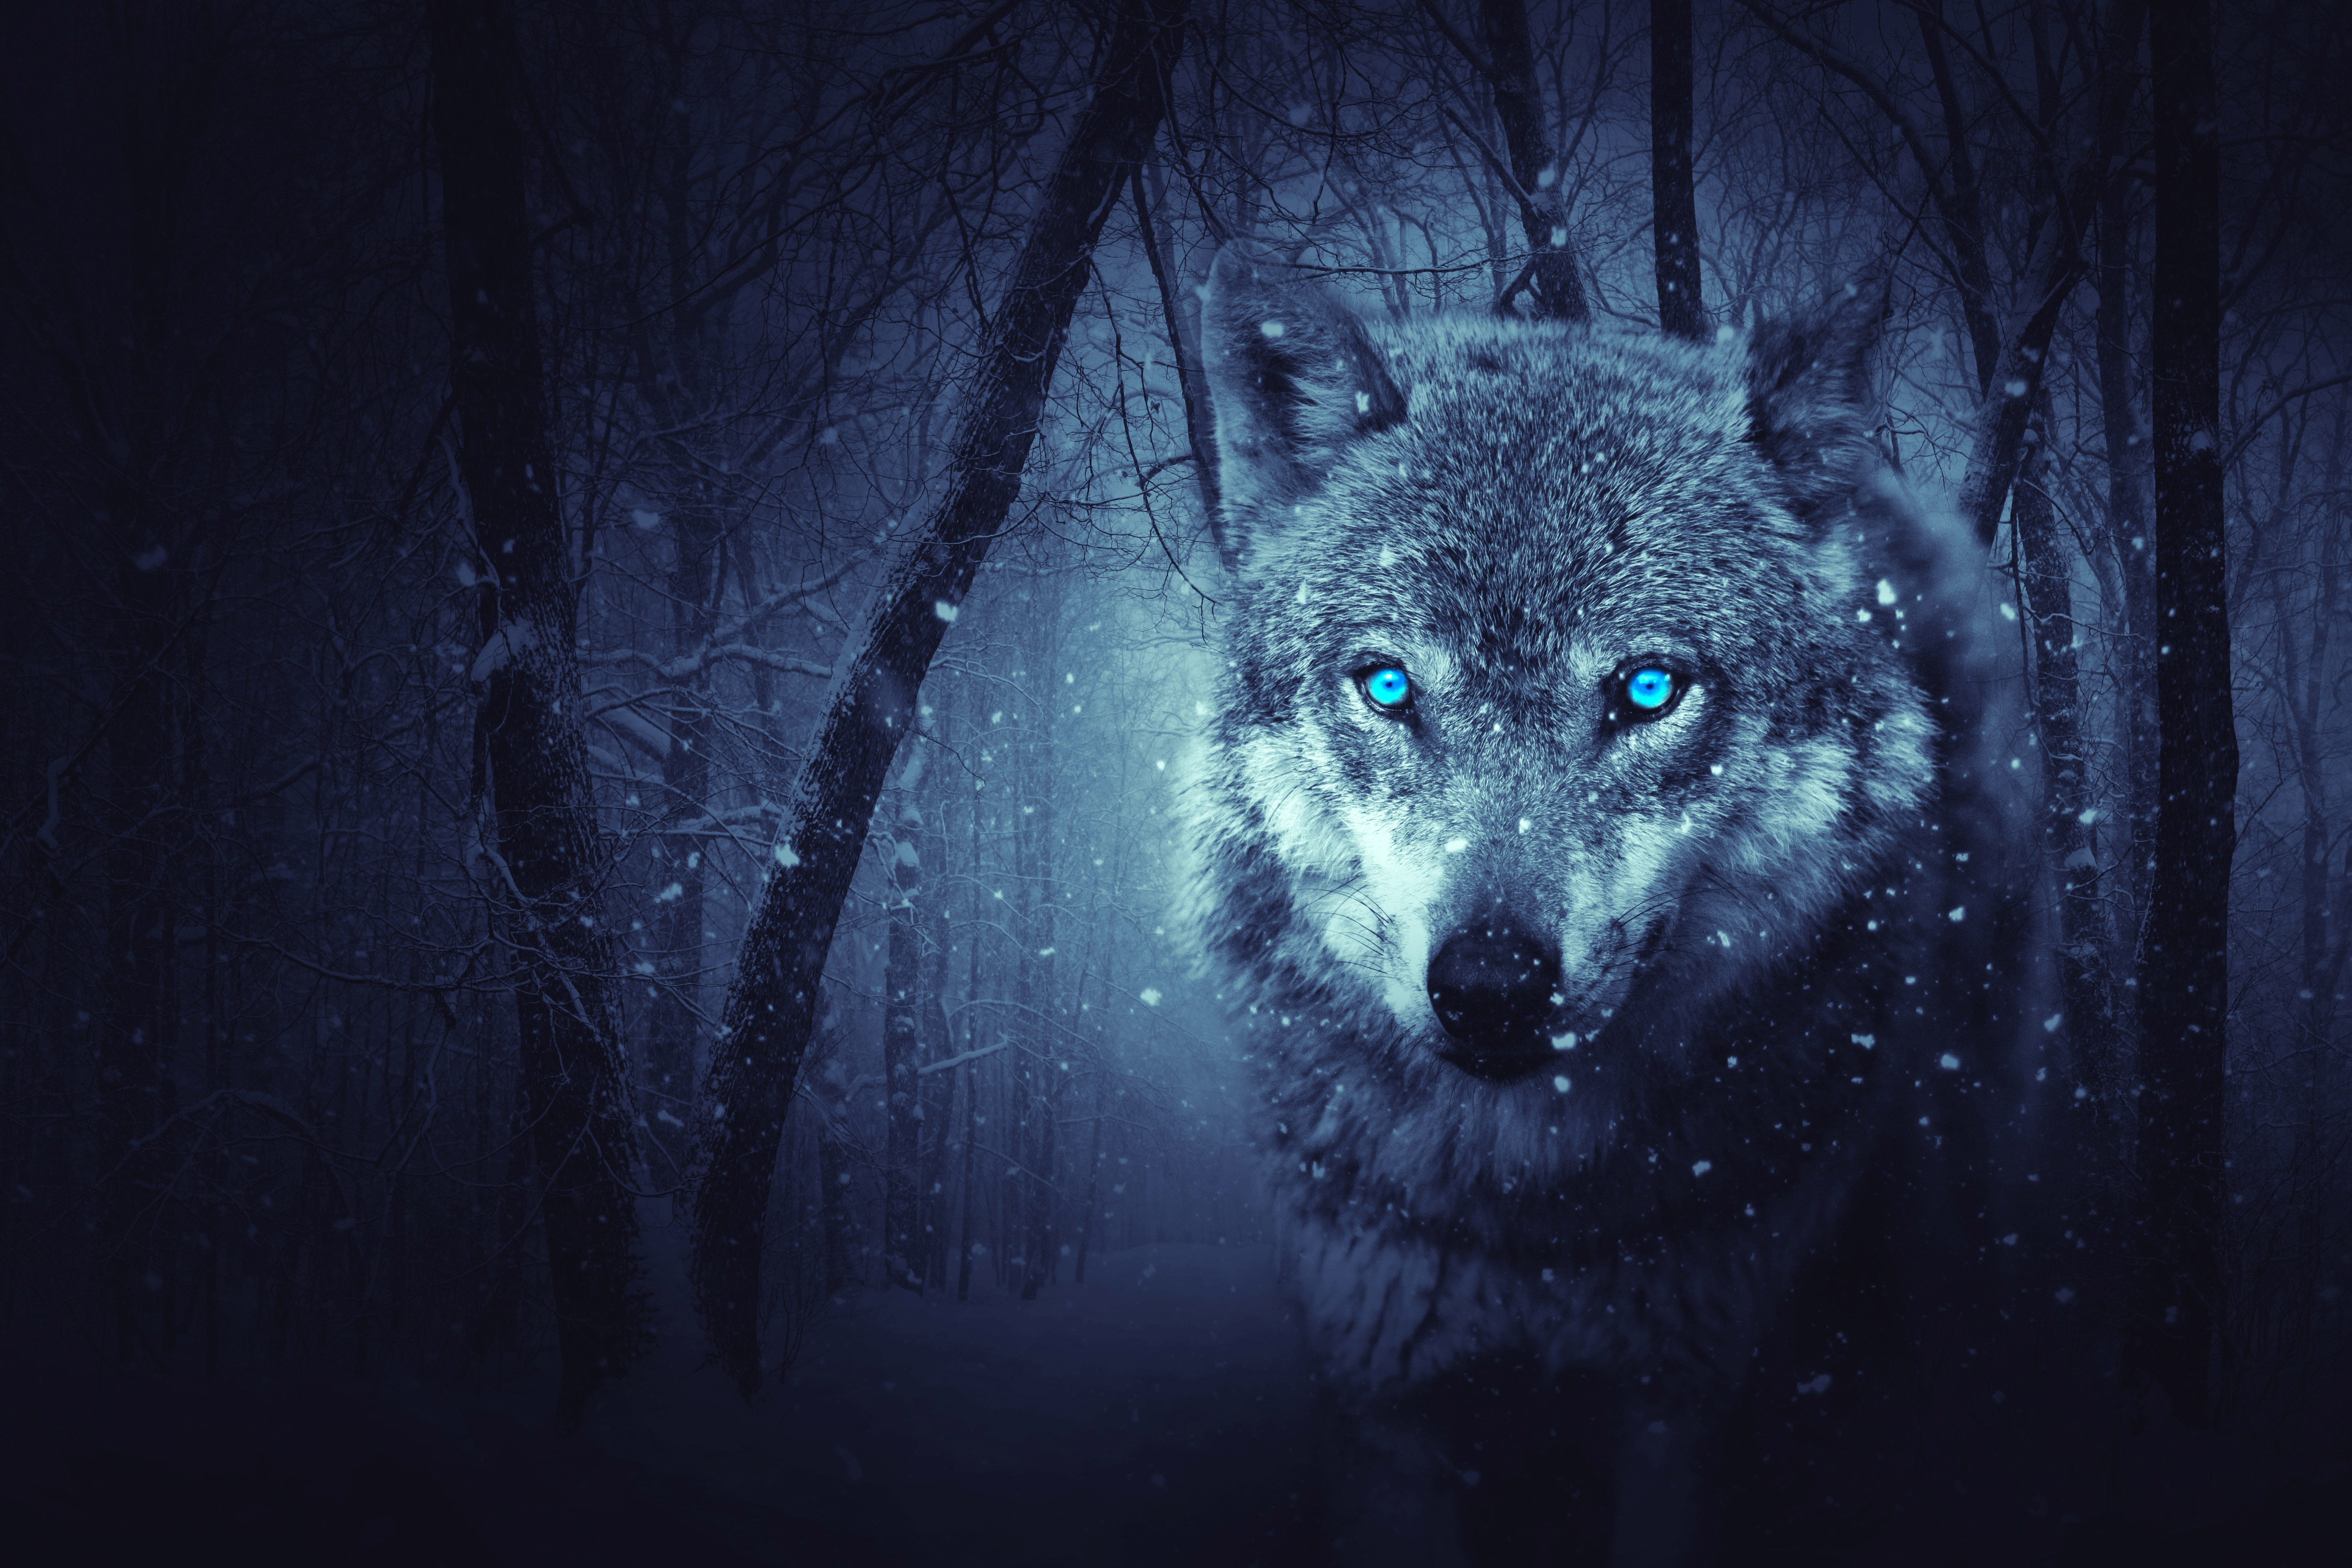 Fantasy Wolf 5k, HD Artist, 4k Wallpaper, Image, Background, Photo and Picture